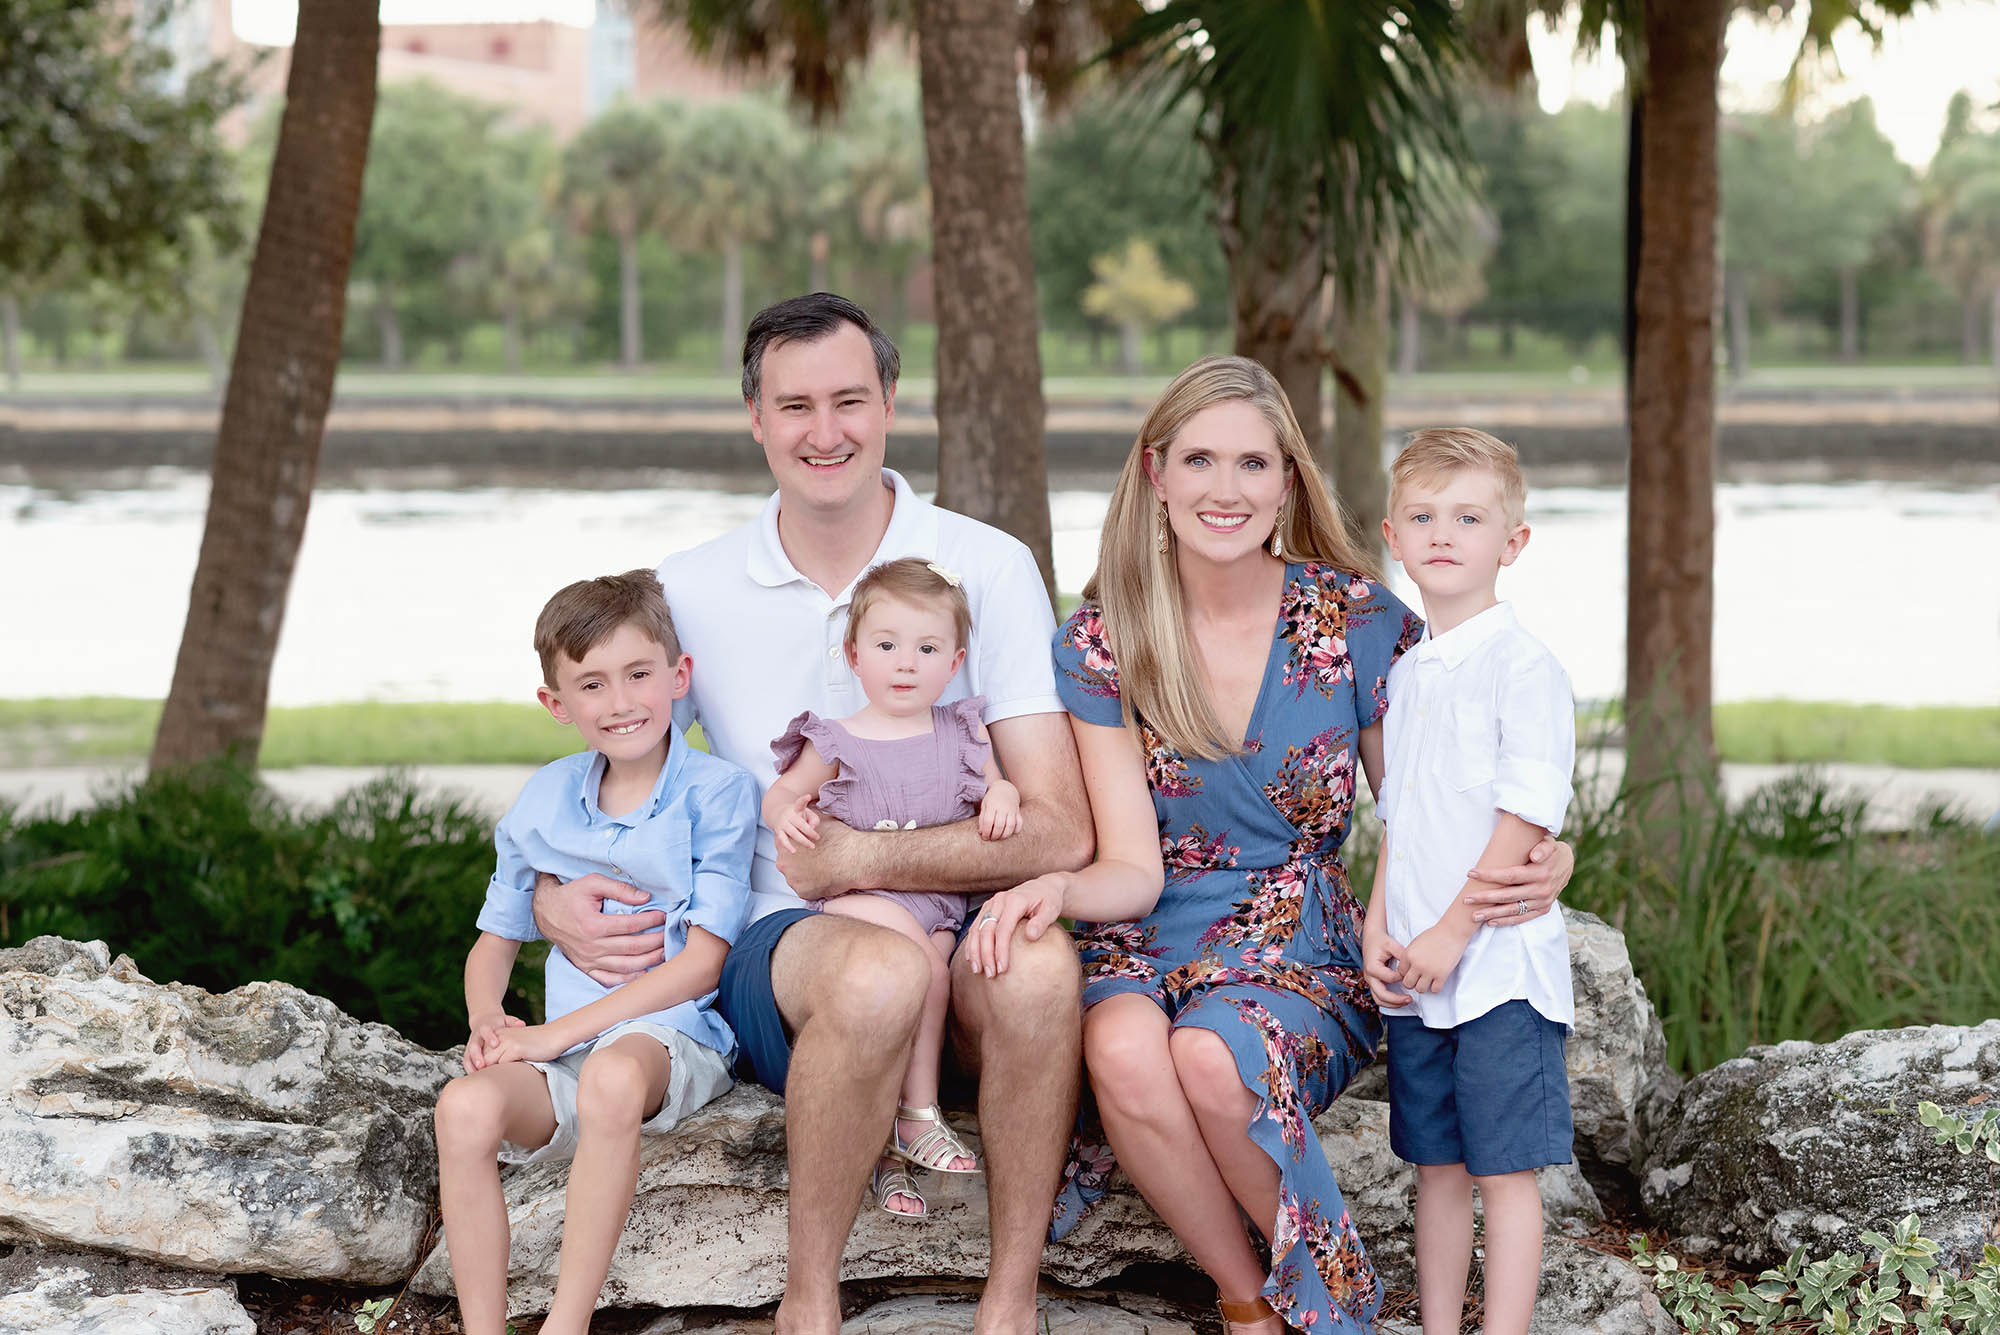 Young family of 5 getting portraits done in a park in Tampa, Florida